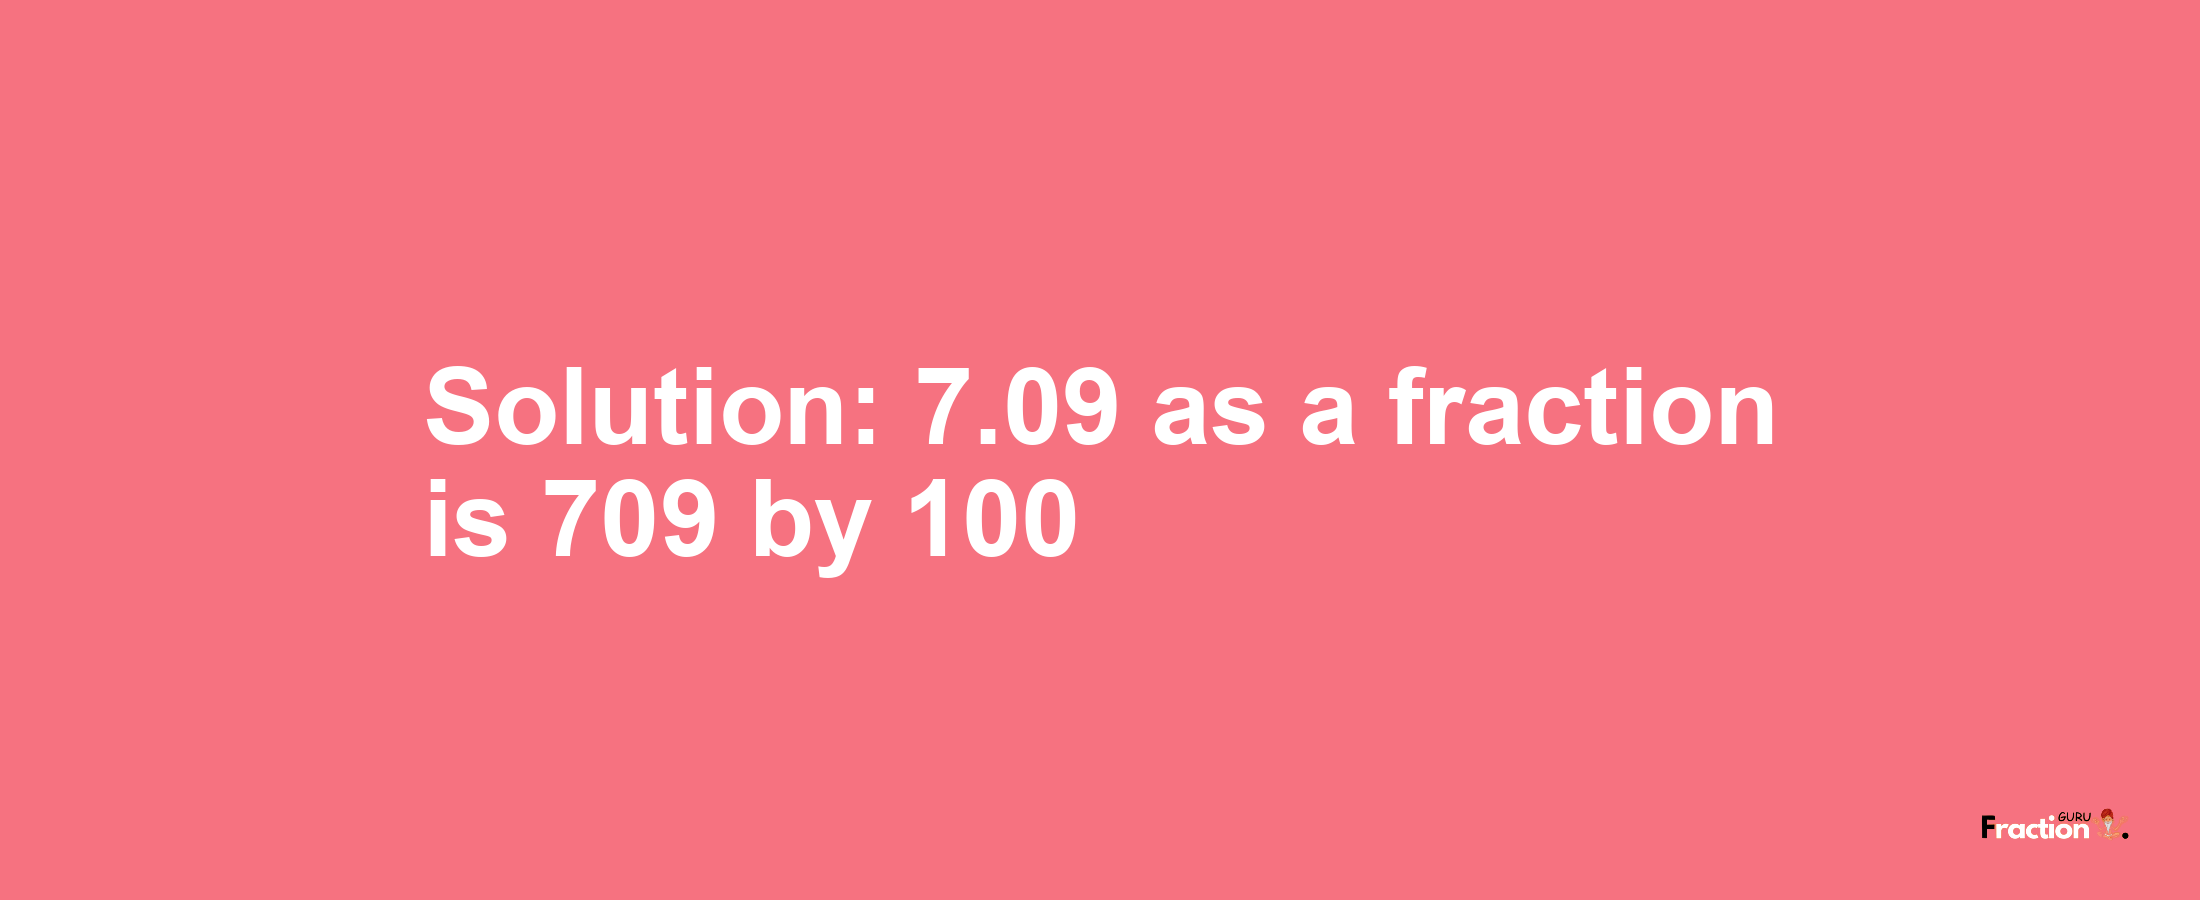 Solution:7.09 as a fraction is 709/100